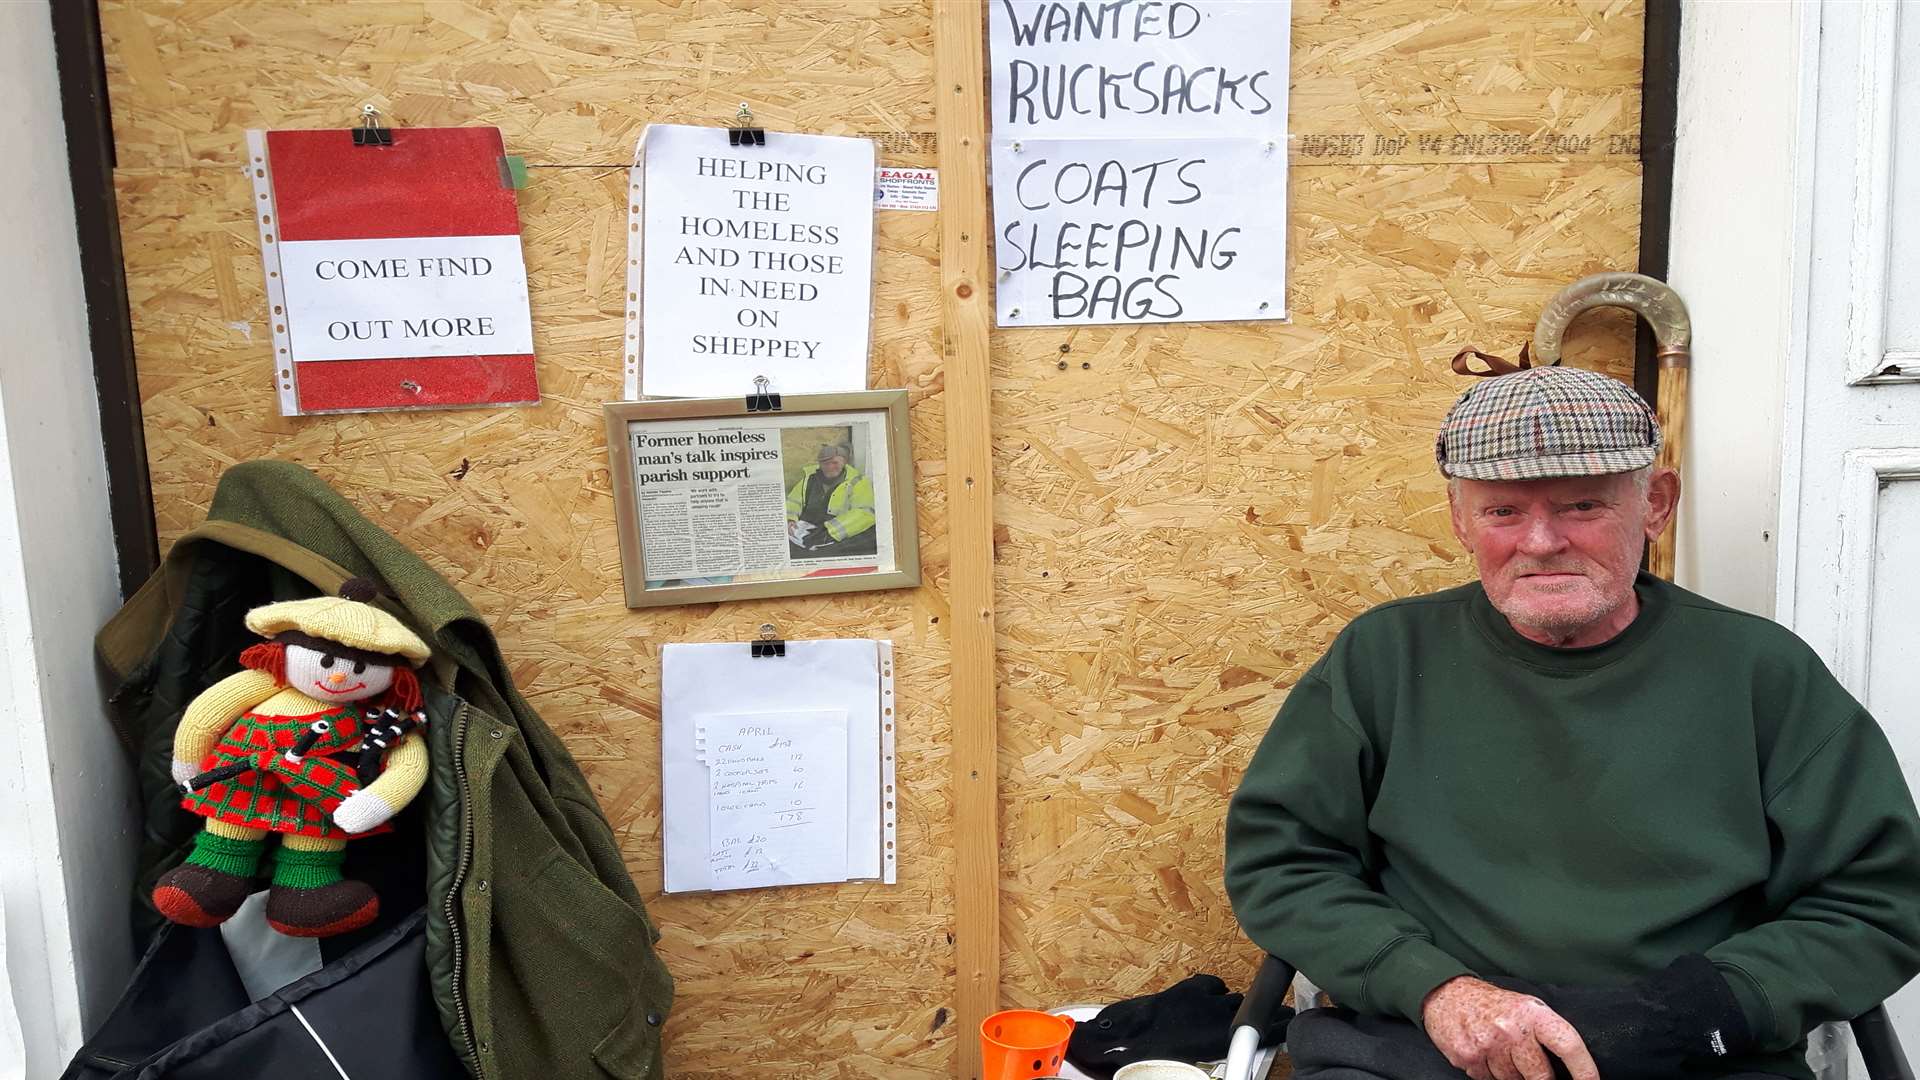 Malcolm Staines, who collects for the homeless, has been told he faces imminent arrest.